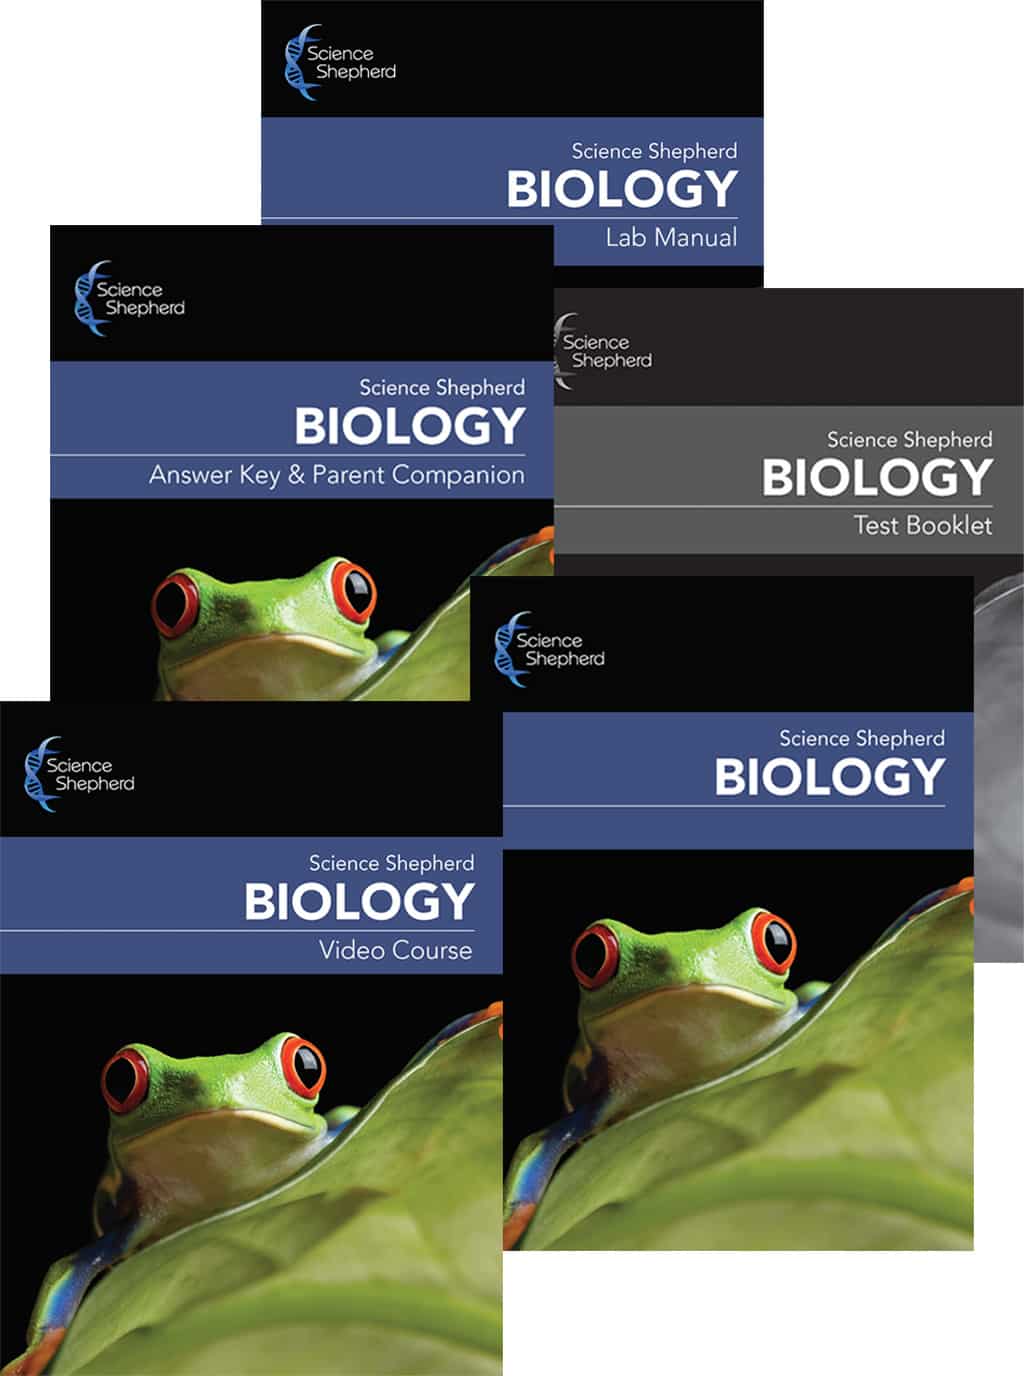 Science Shepherd Homeschool Biology Curriculum 3-Book Set with video course and lab manual